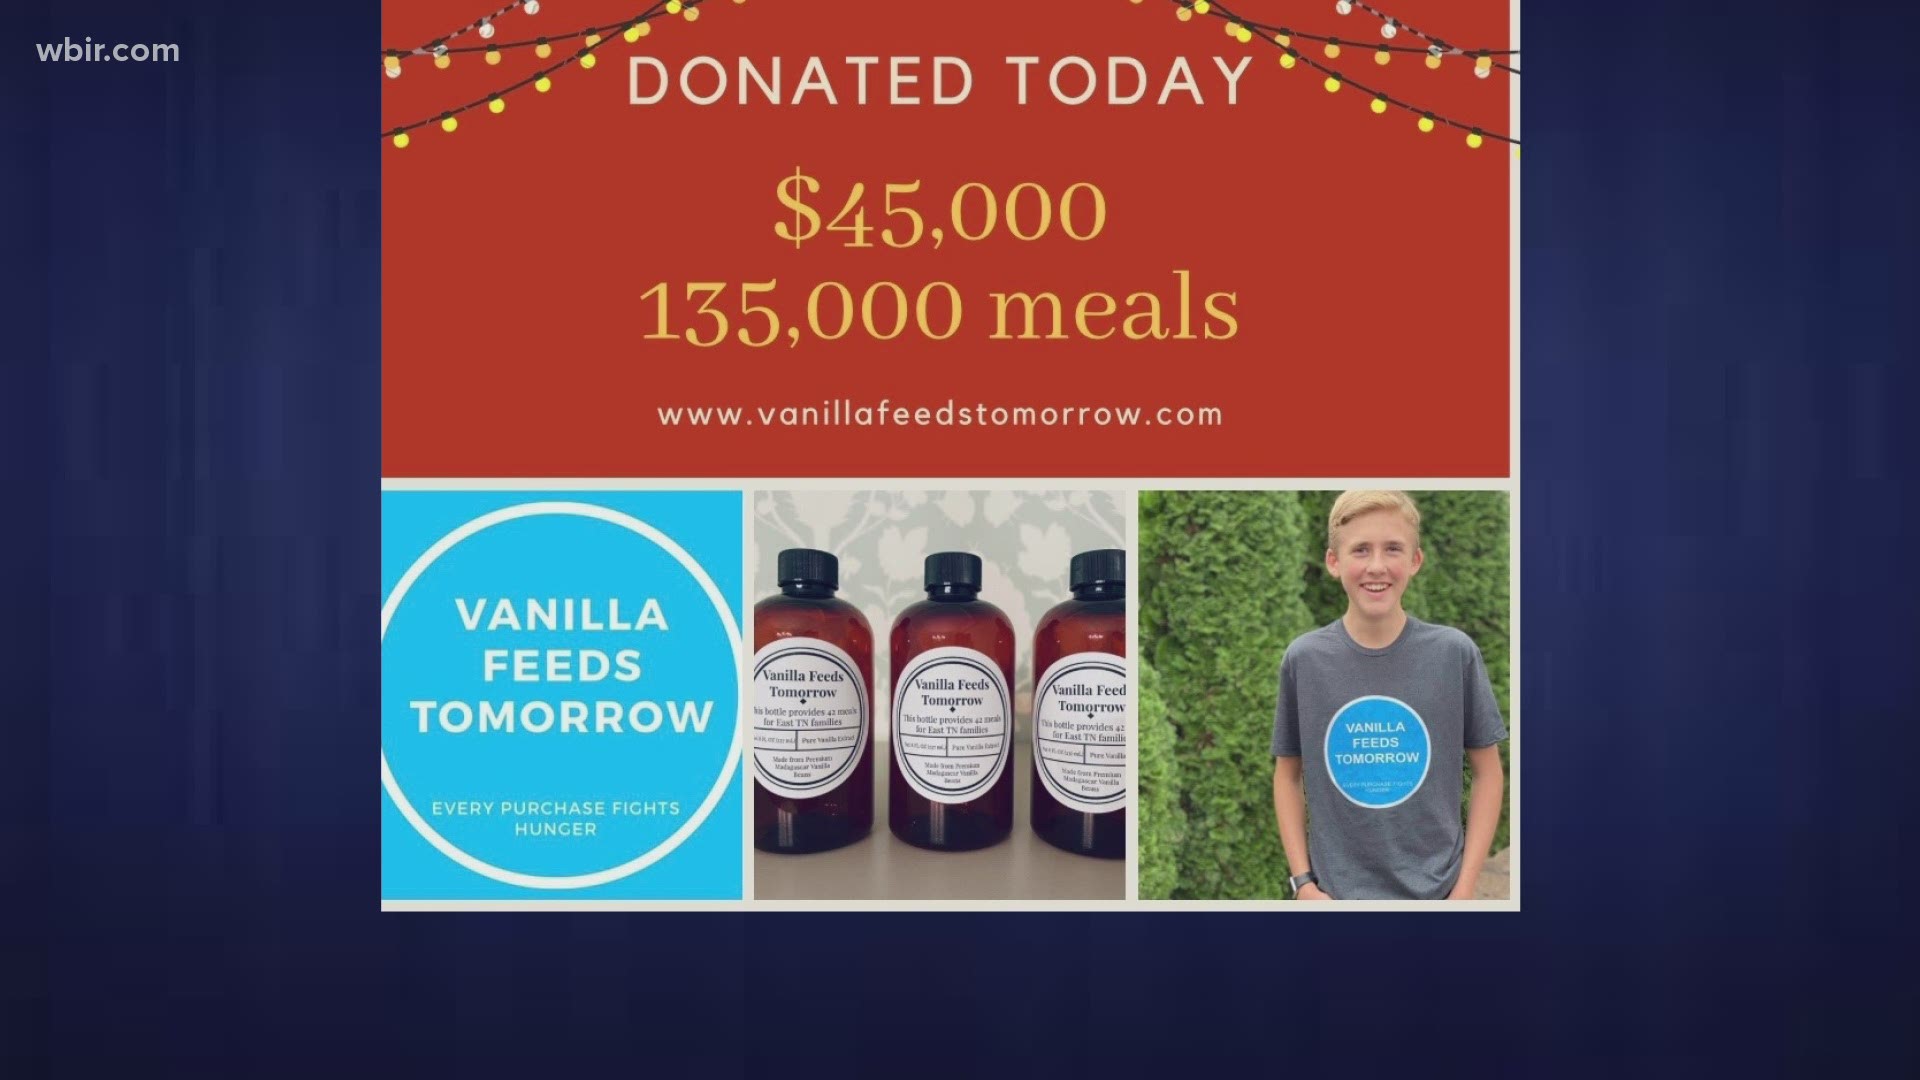 William Cabaniss is  a  freshman at Farragut High School. Sales of his Vanilla extract raised $45,000 for Second Harvest  Food Bank of E.T. Dec. 30, 2020-4pm.o